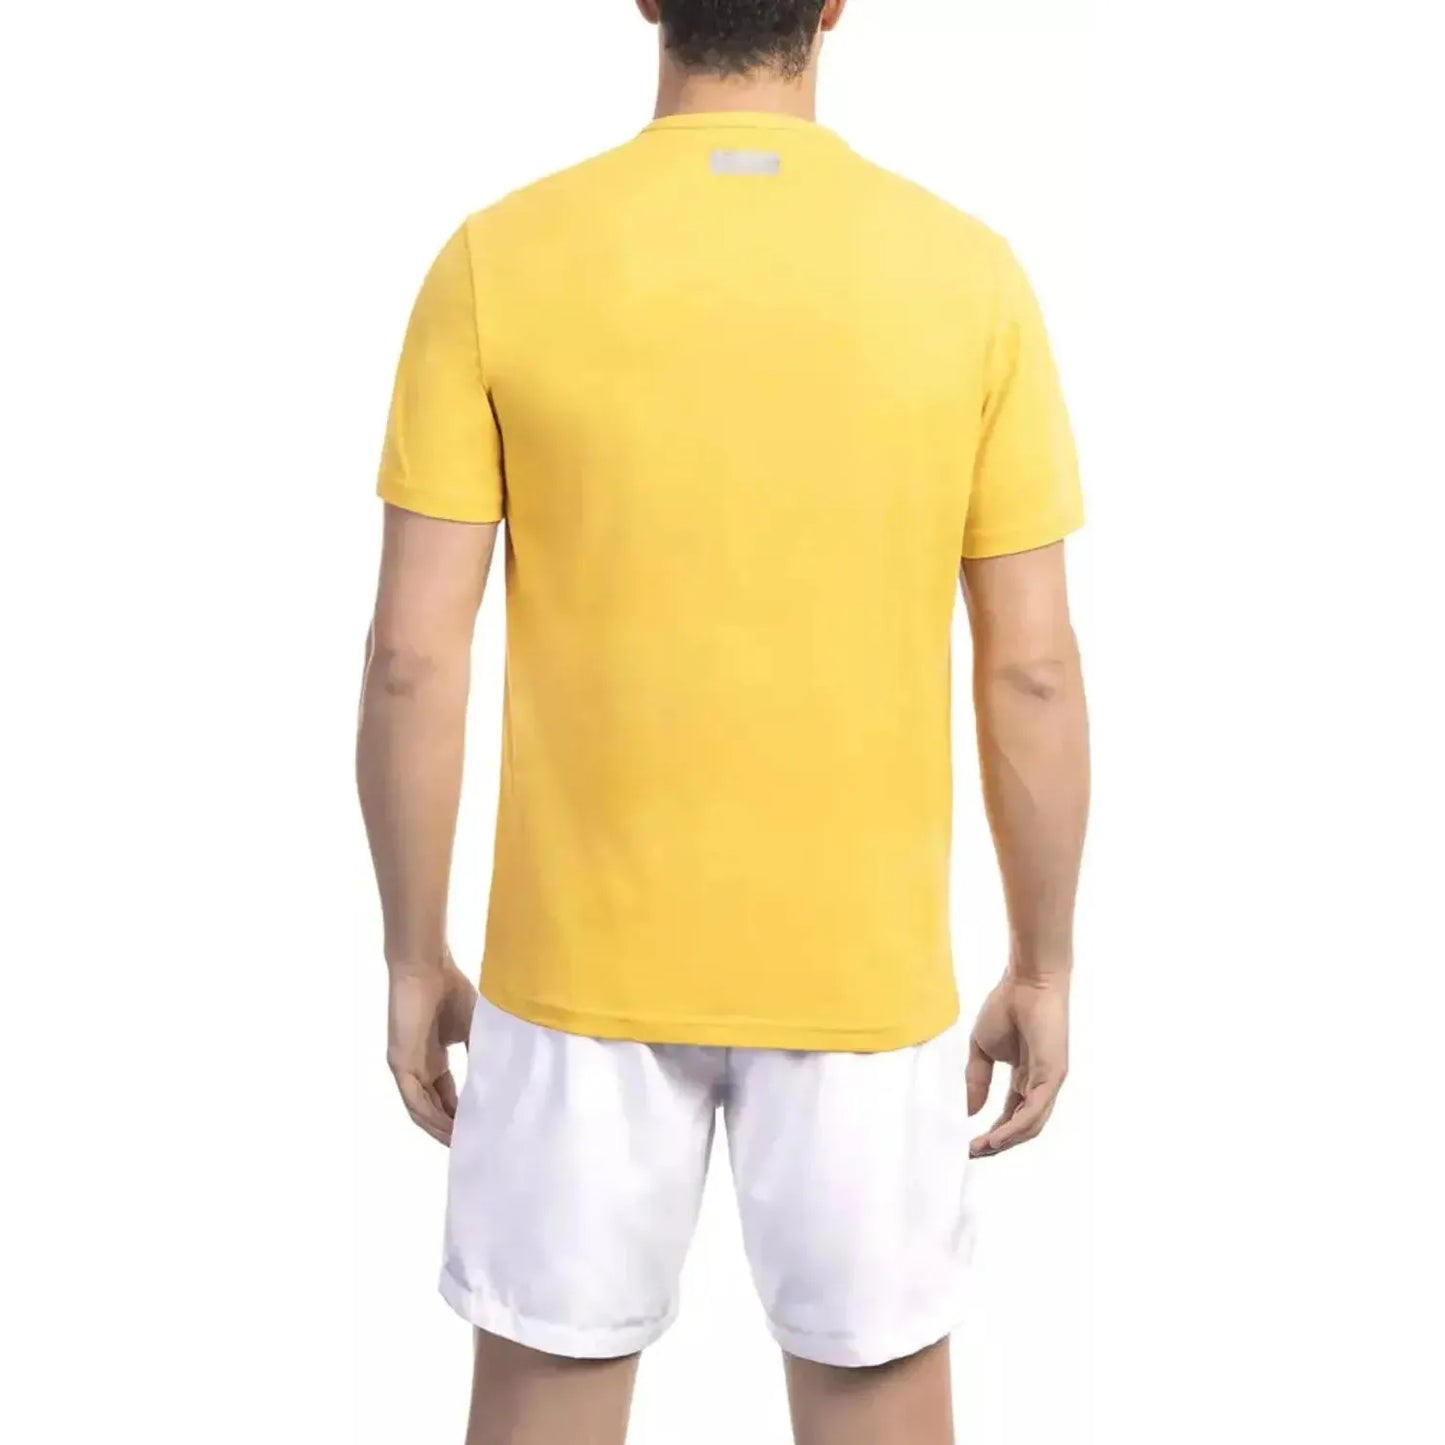 Bikkembergs Sunny Yellow Cotton Tee with Back Logo Detail yellow-cotton-t-shirt-1 product-22052-514853191-26-e9a54756-816.webp